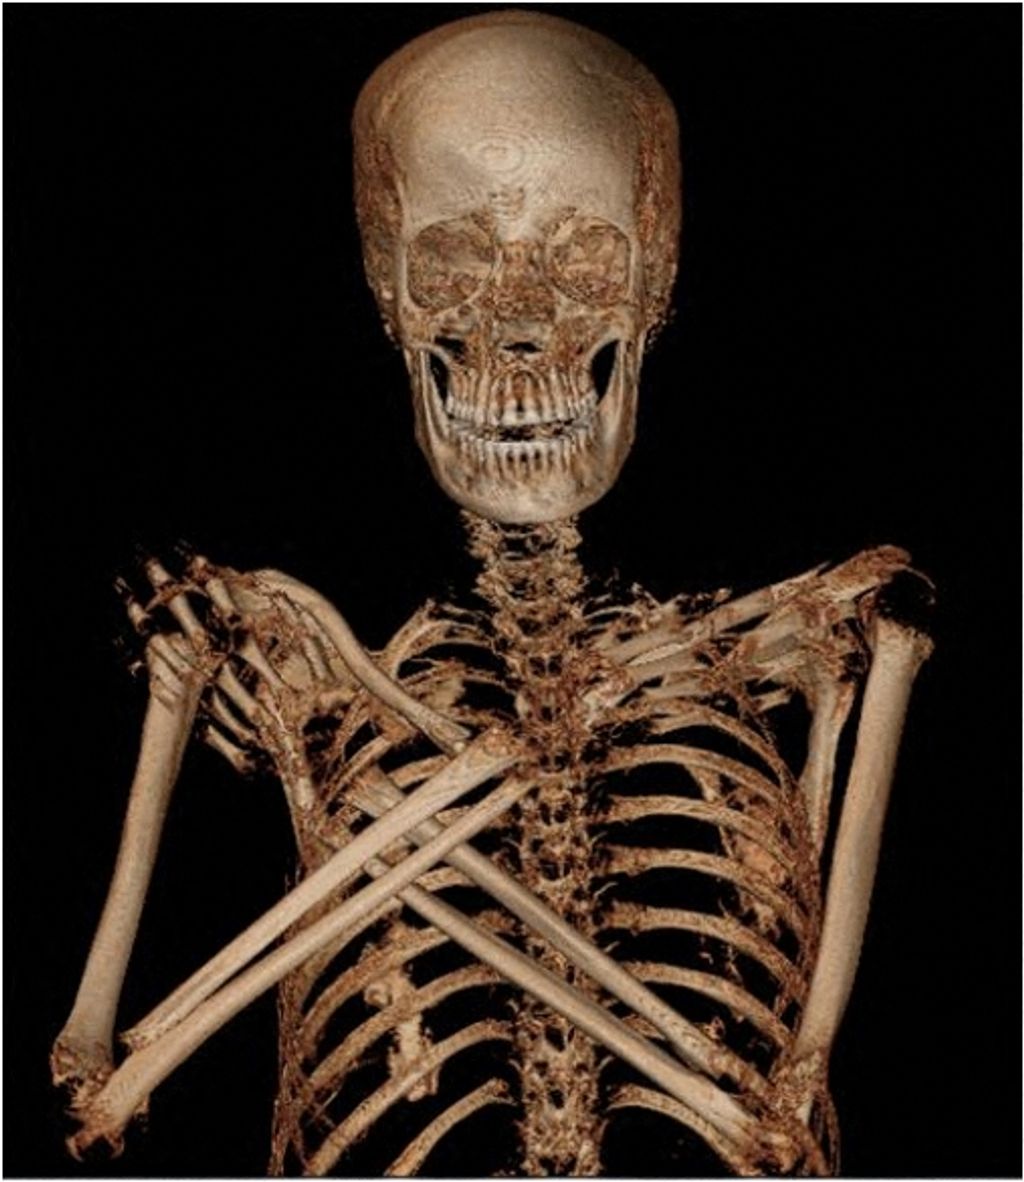 Mummy-to-be: Pregnant embalmed body identified in Poland archaeology Square Vertical 